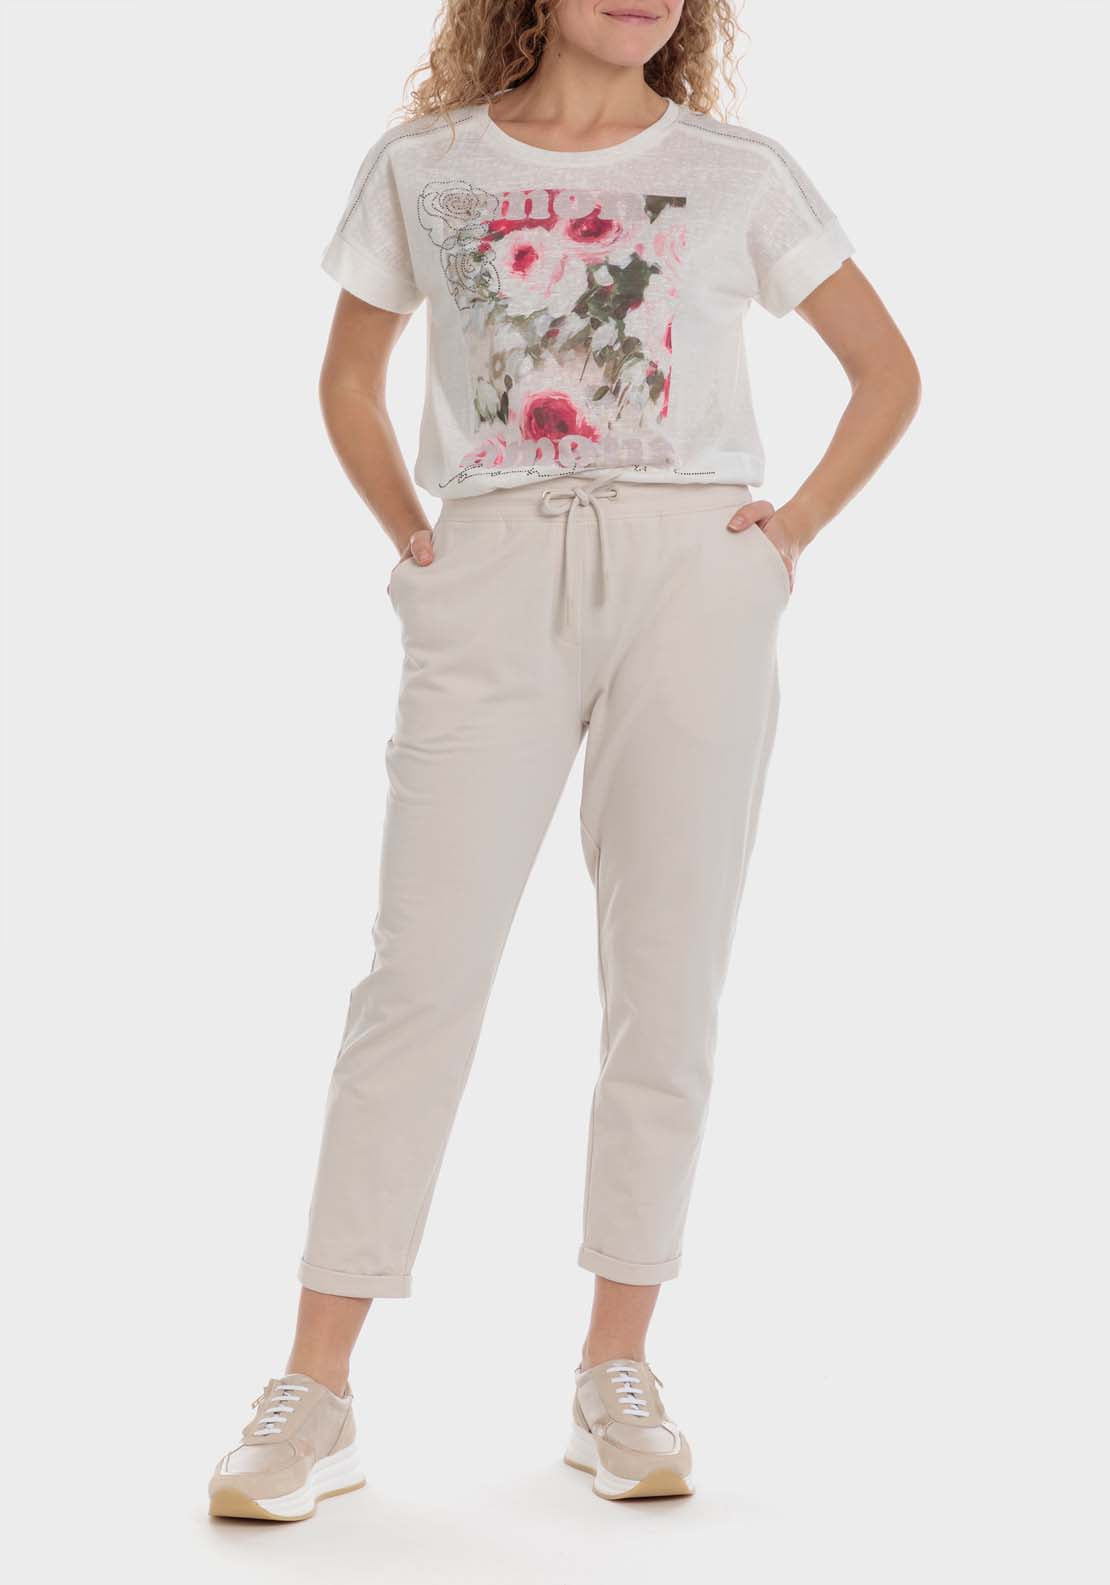 Punt Roma Floral Print T-Shirt 3 Shaws Department Stores